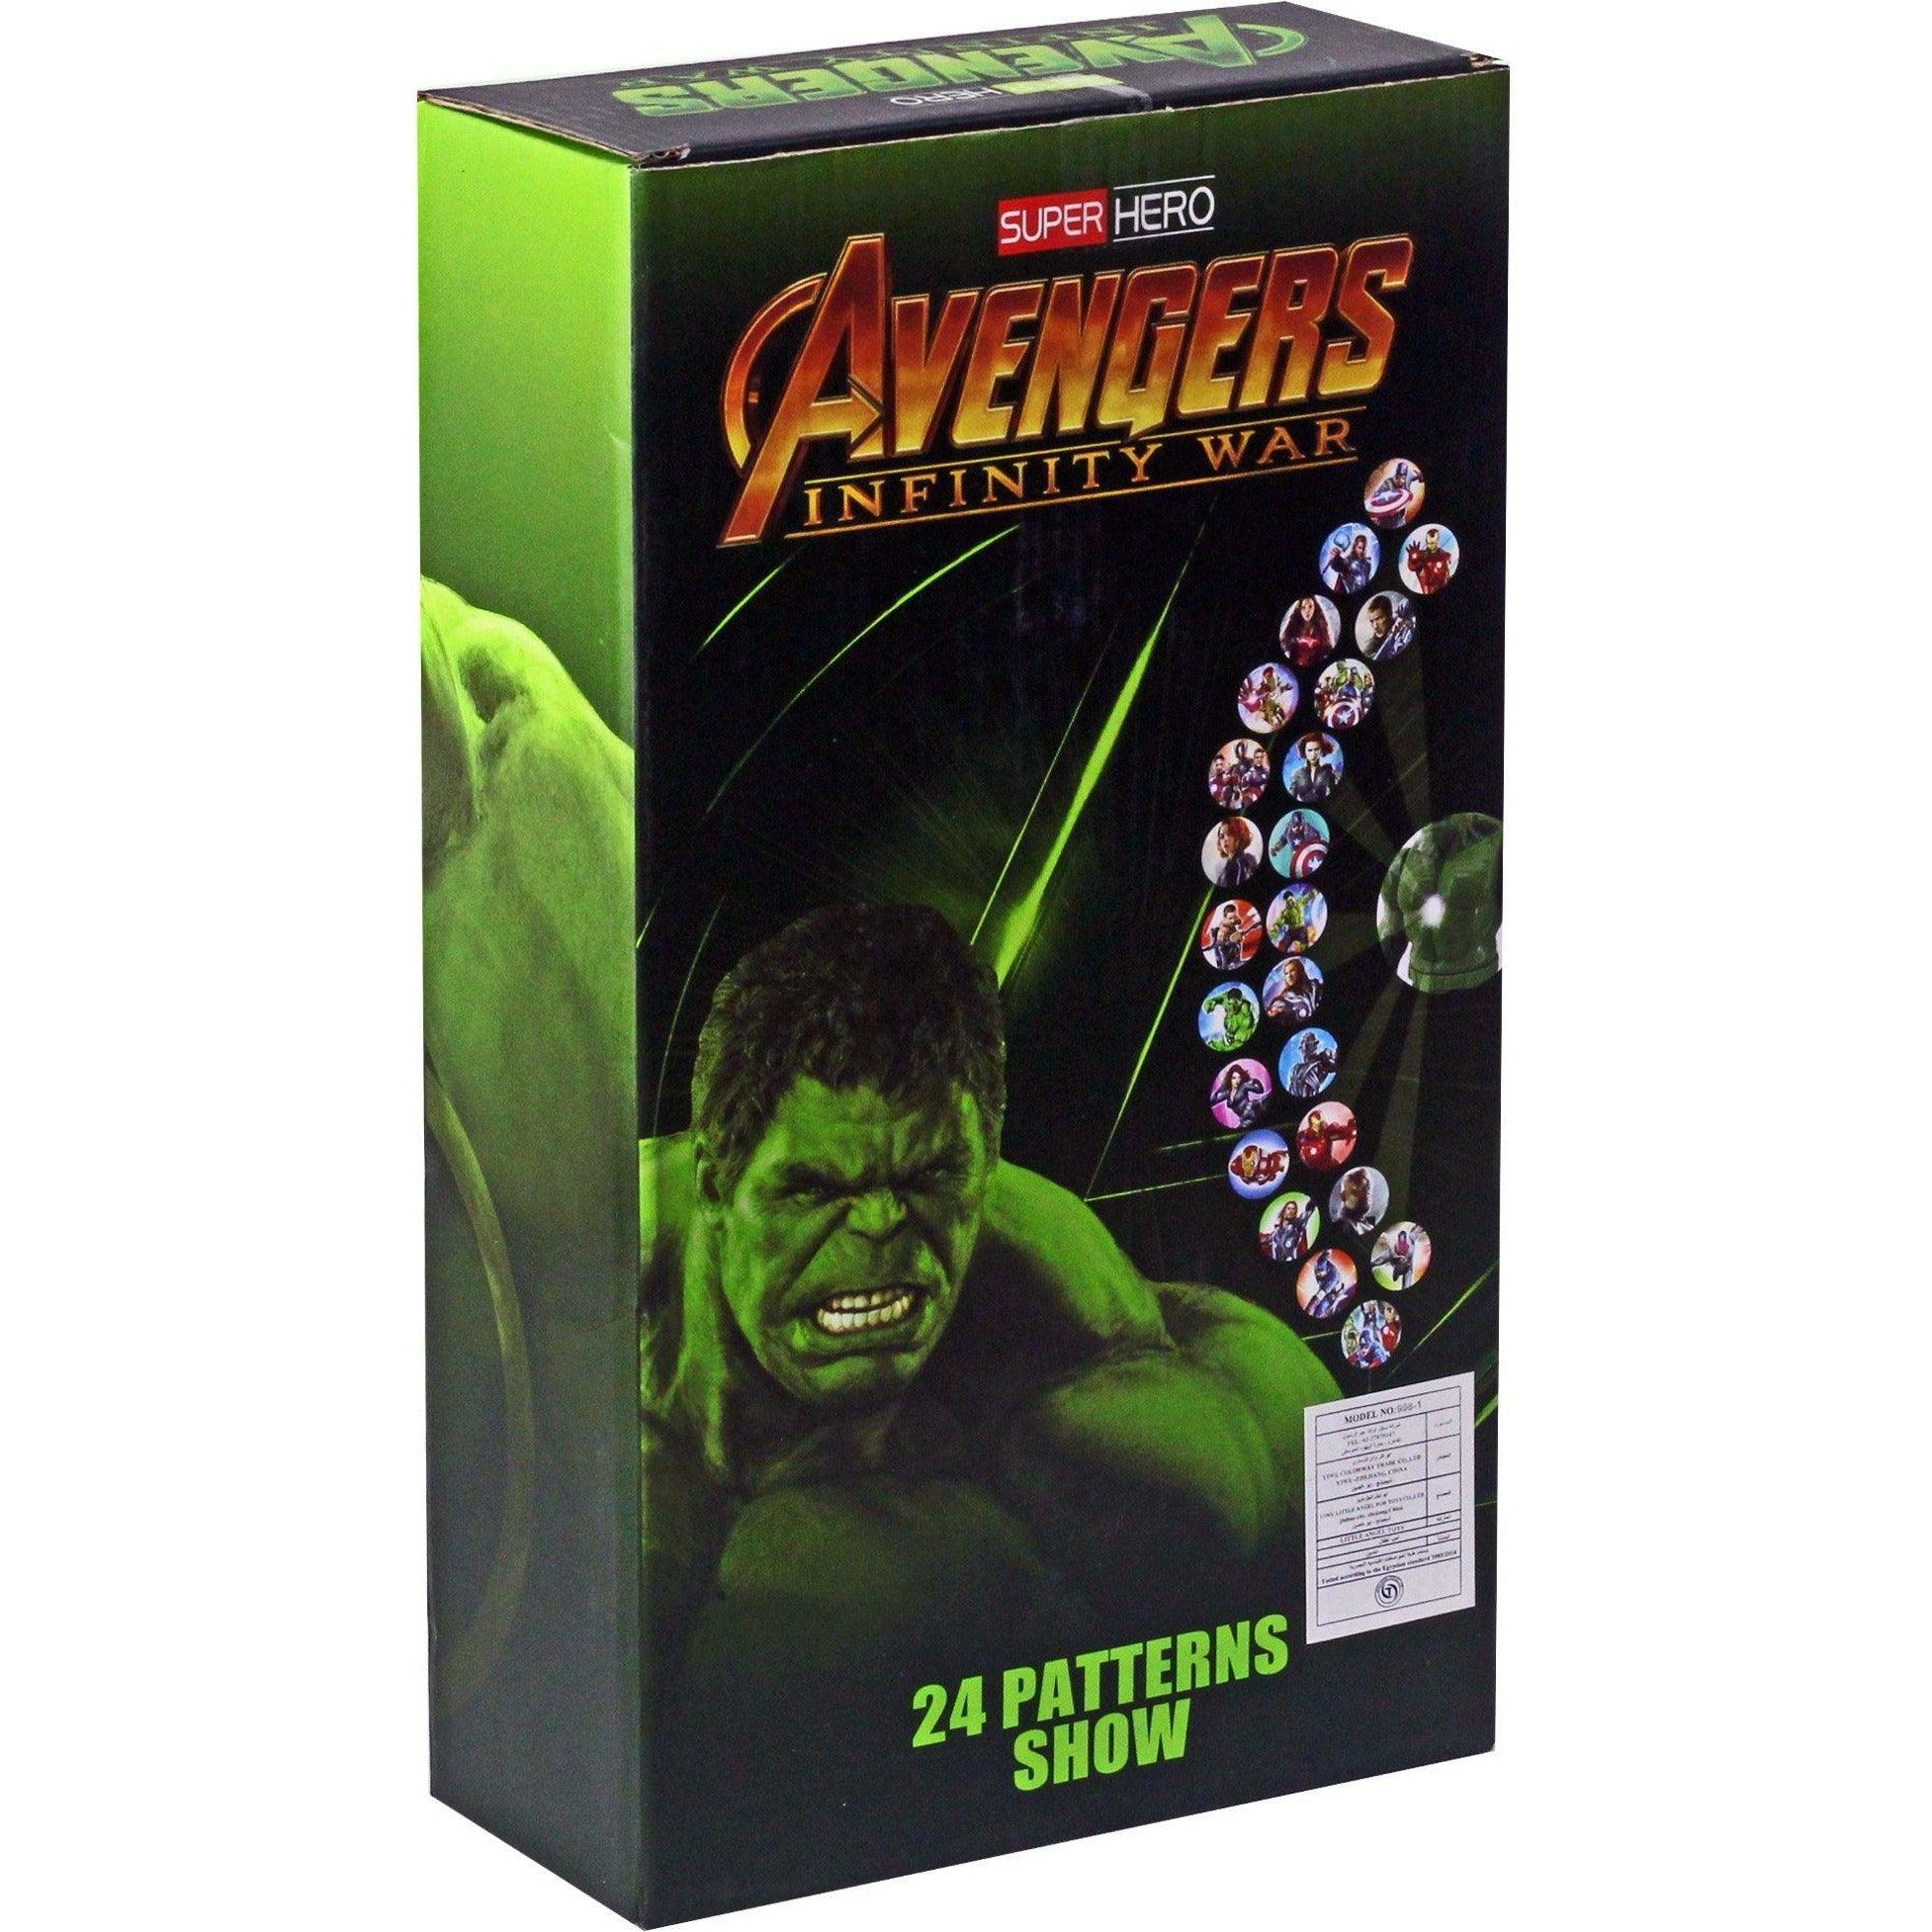 Avengers Hulk Action Figure Projector 24 Patterns Show - BumbleToys - 5-7 Years, Action Battling, Avengers, Boys, Hulk, Toy House